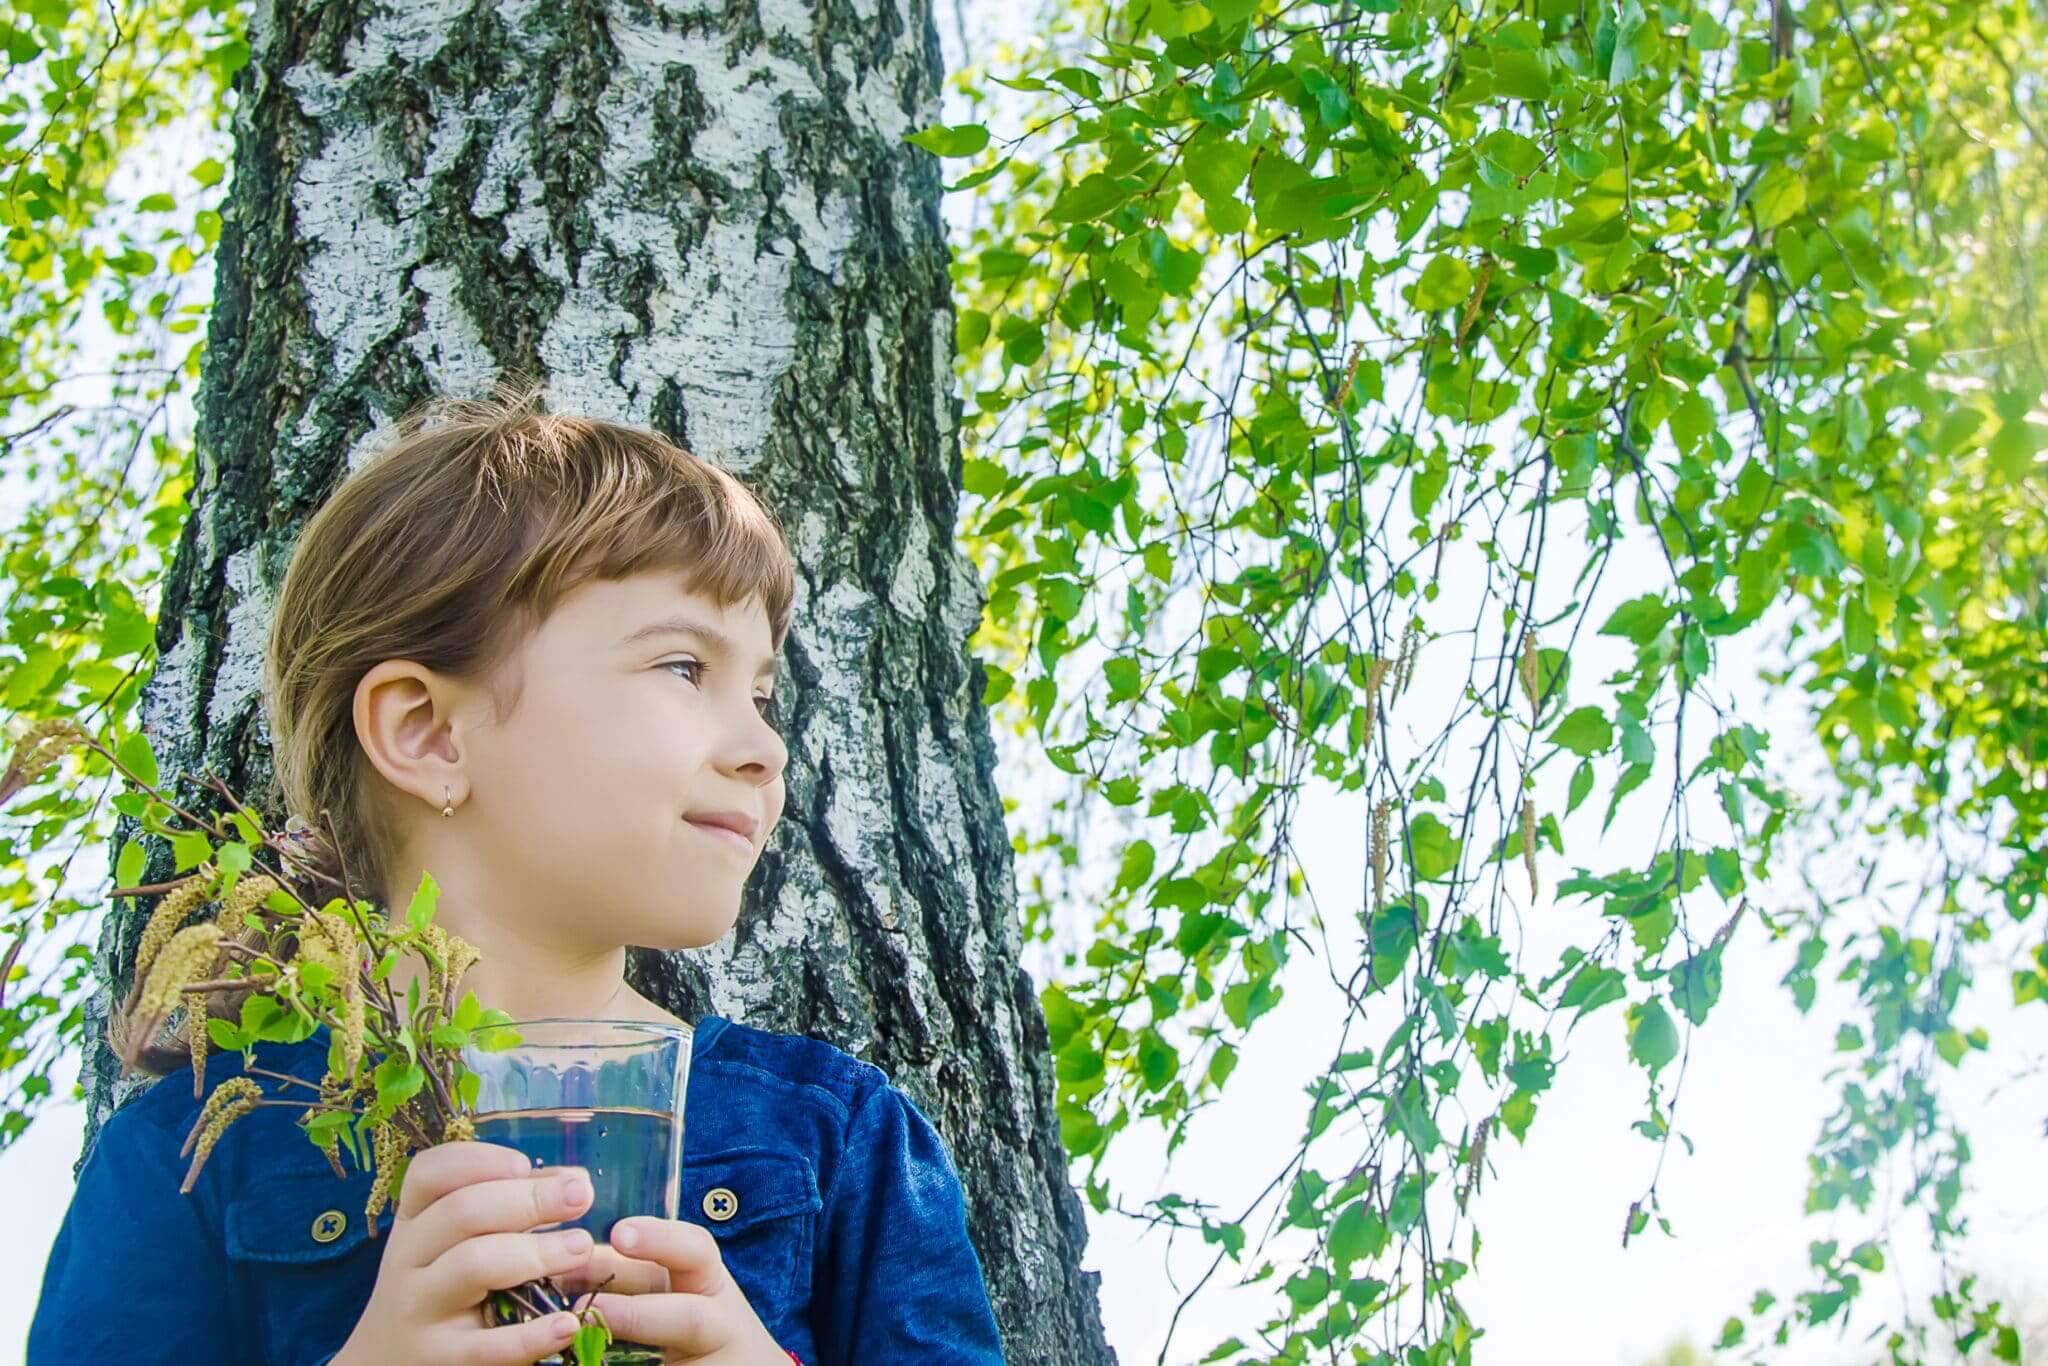 Birch Water – What is it, who’s it good for, and why?